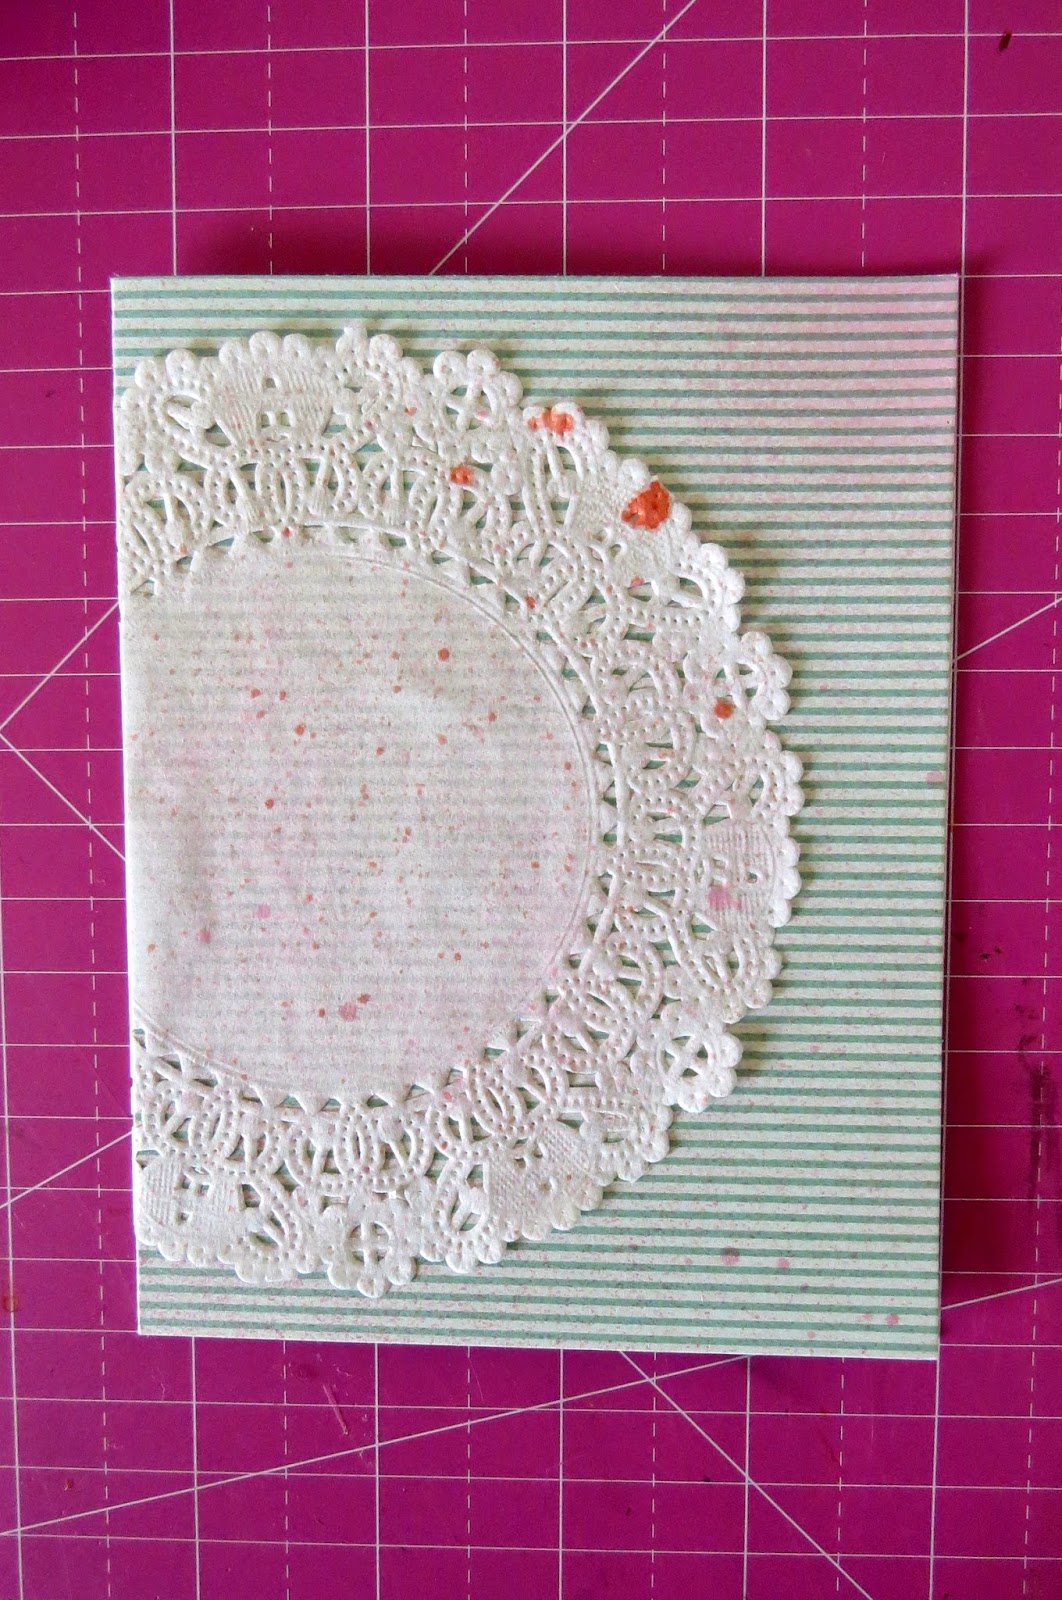 SRM Stickers Blog - Doily Thank You Card Tutorial by Shannon - #card #thanks #doilies #stickers #stitches #borders $fancy #sentiments #tutorial